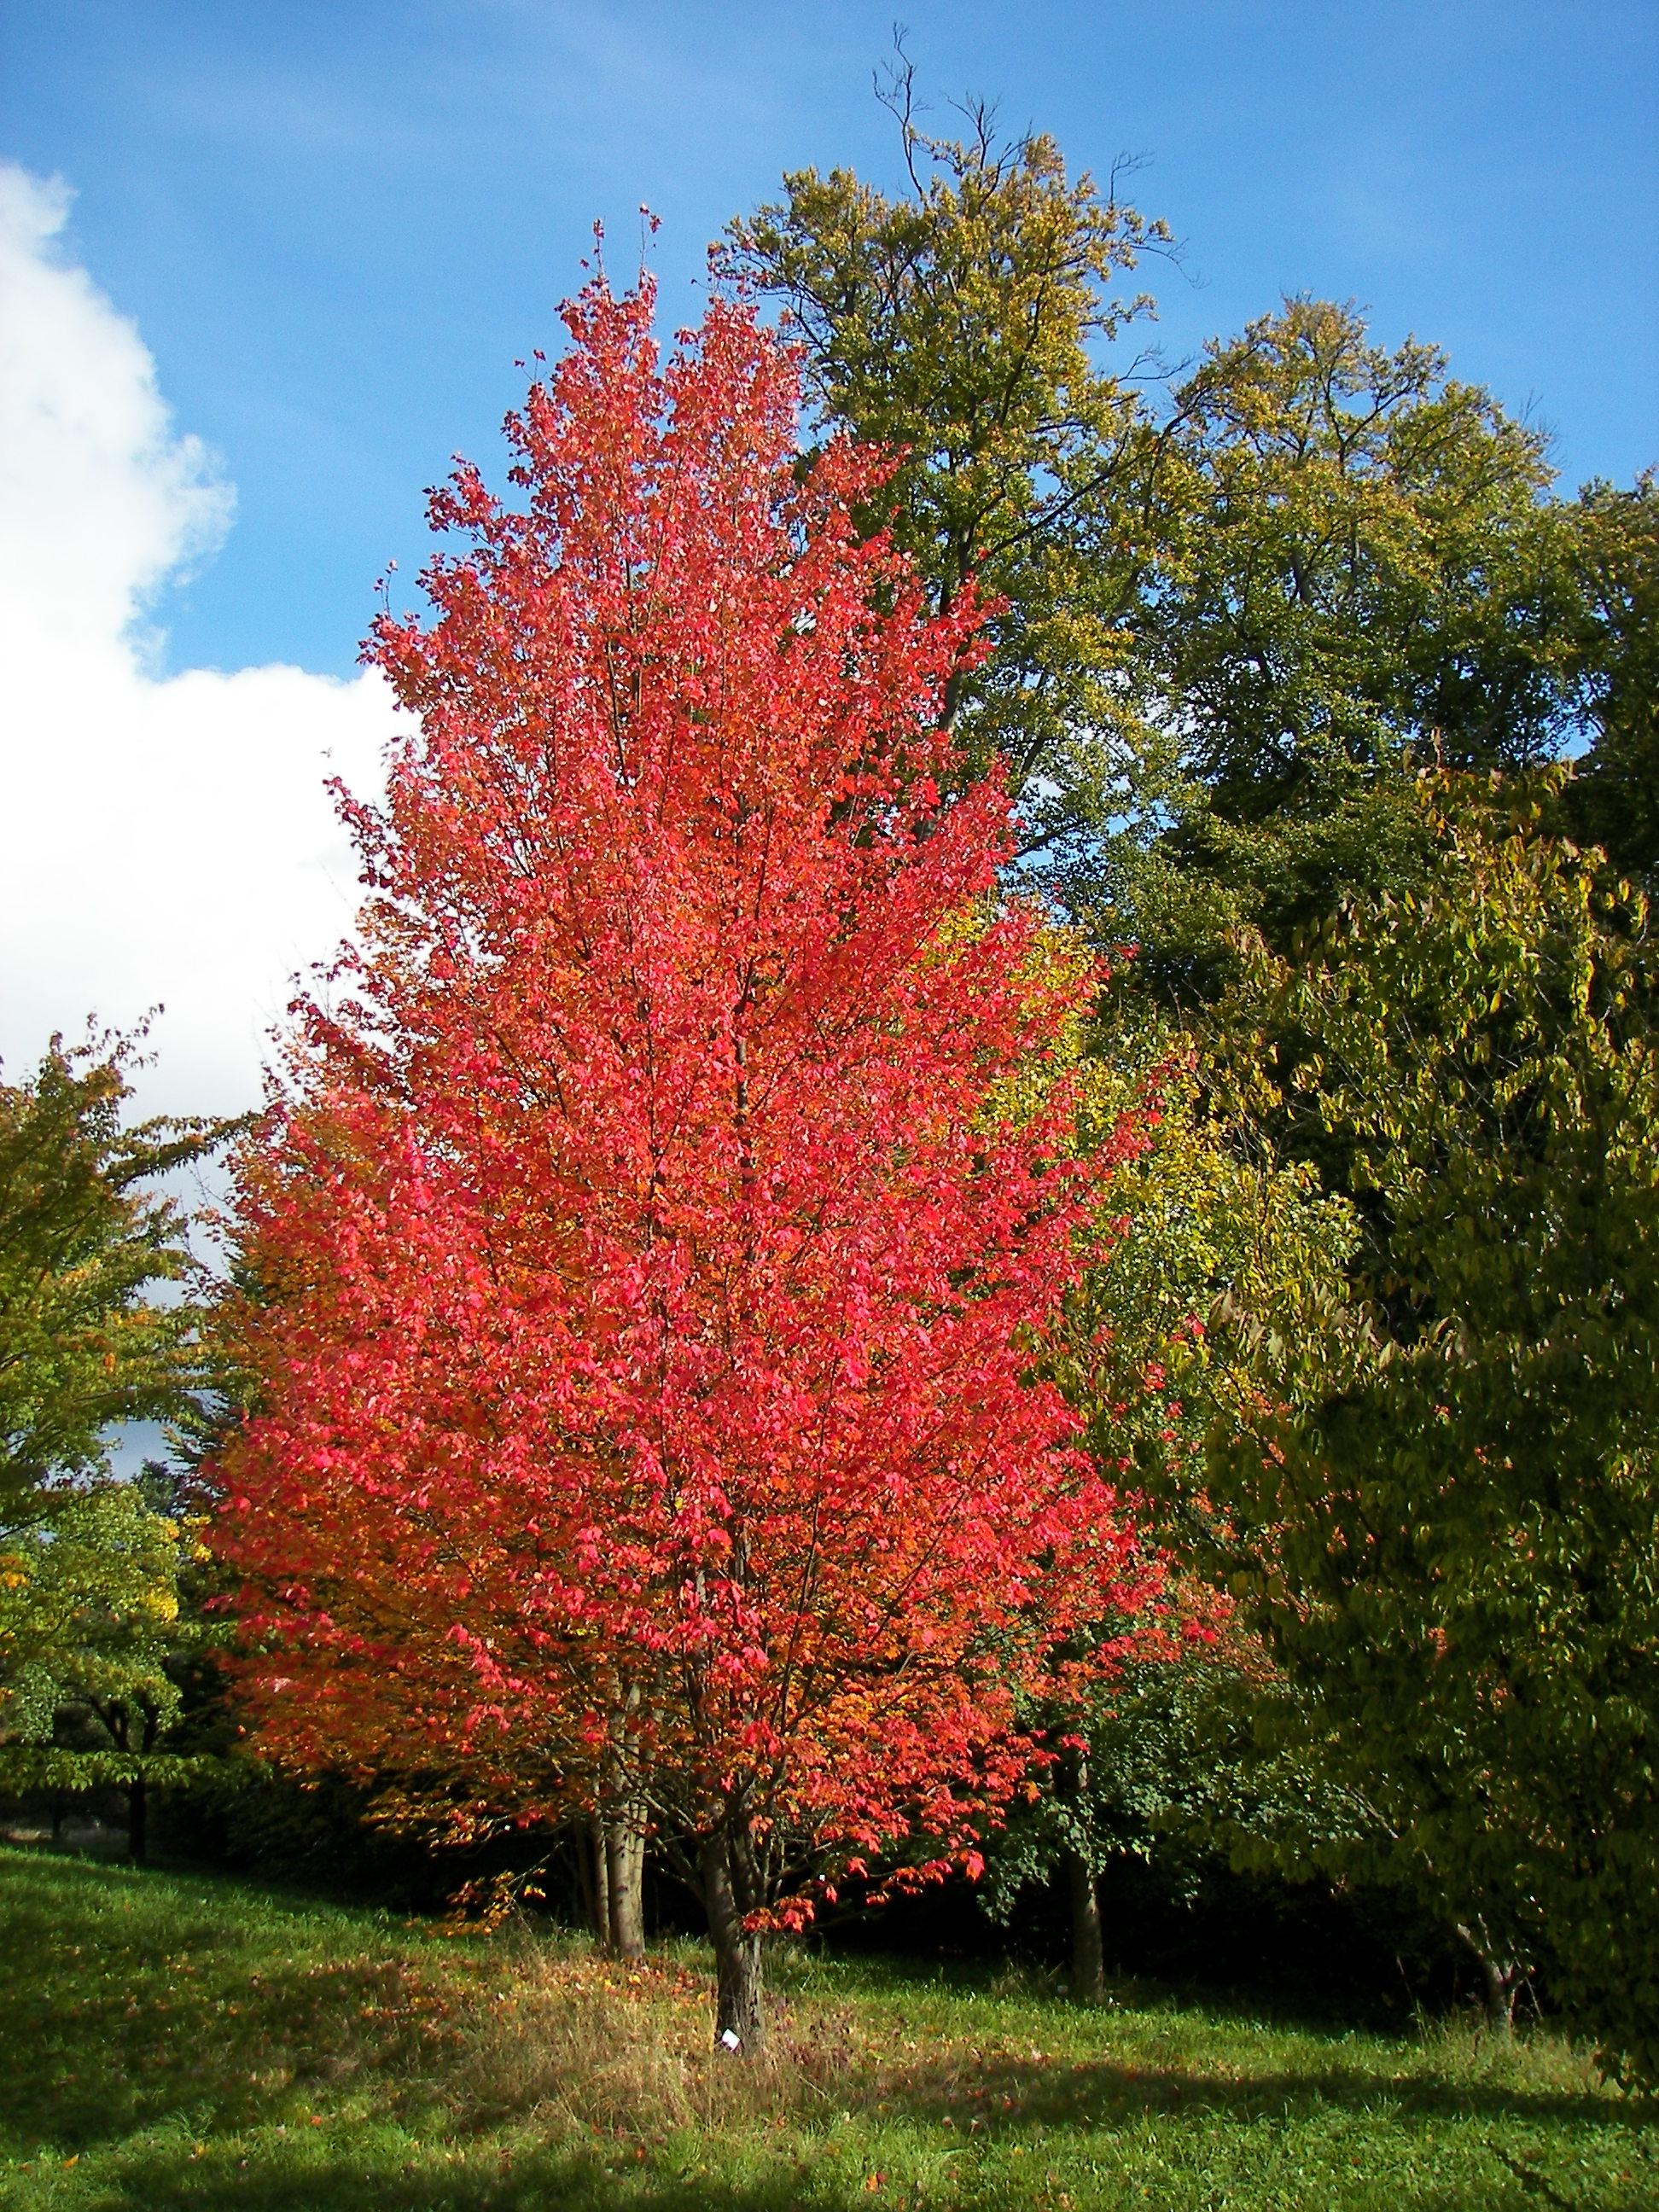 red leaves on dark-brown branches and trunk